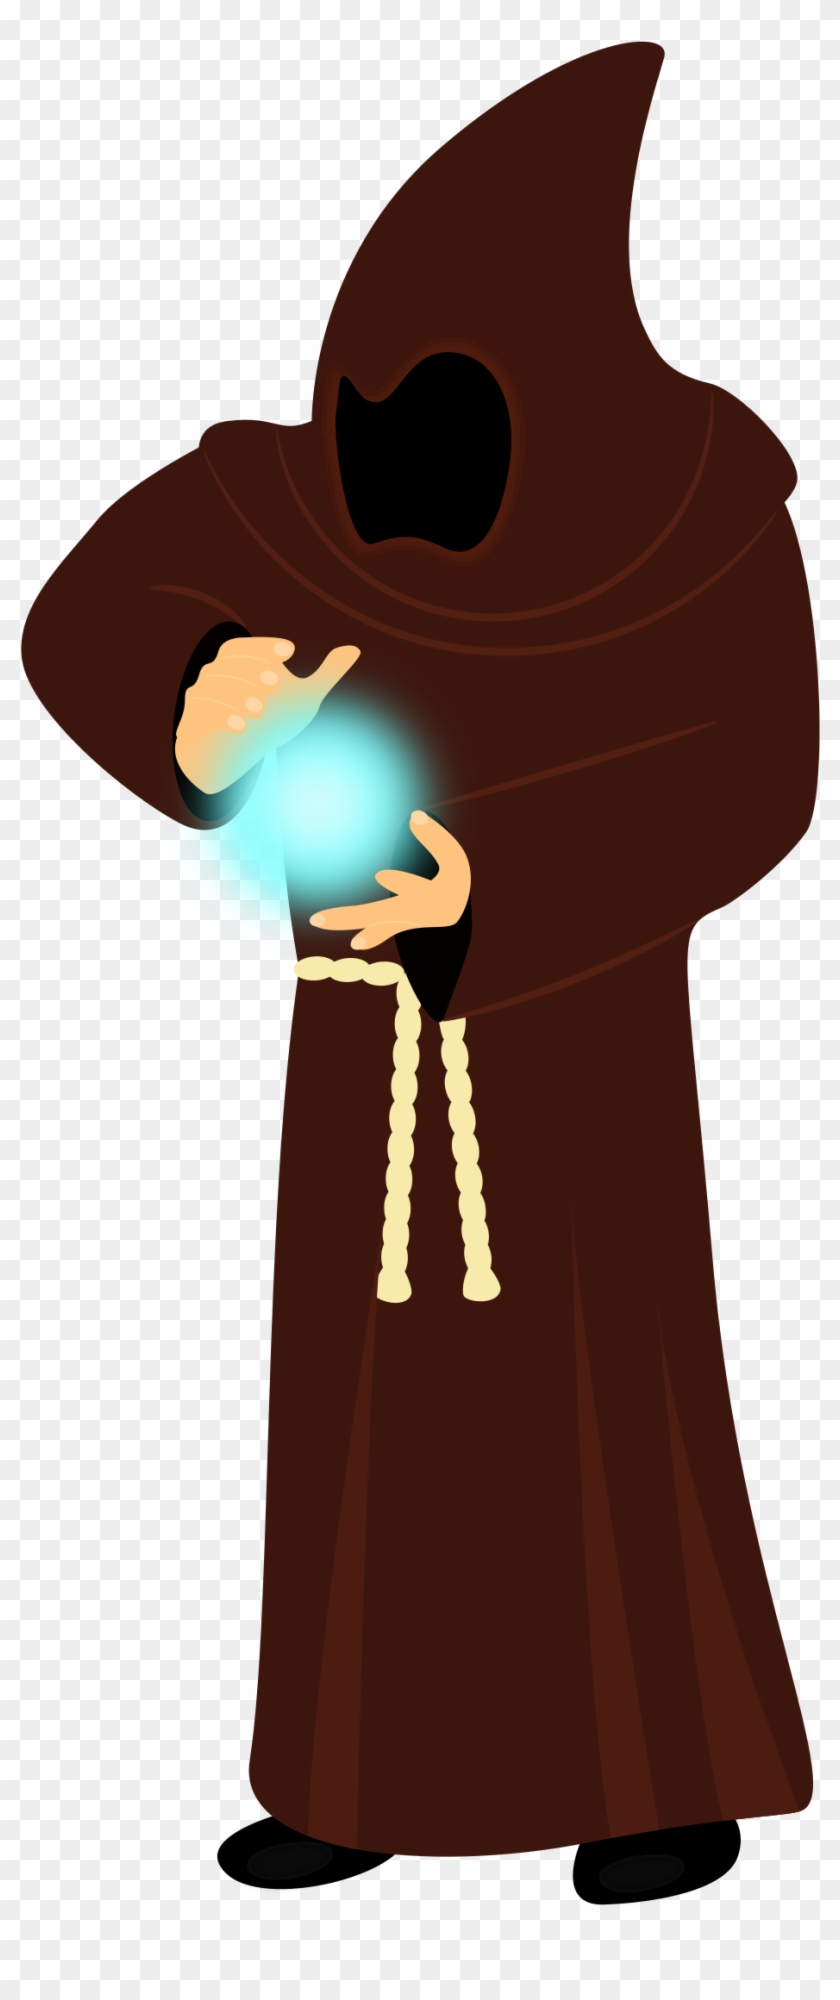 Projecting Energy - Monk Icons Png #877536